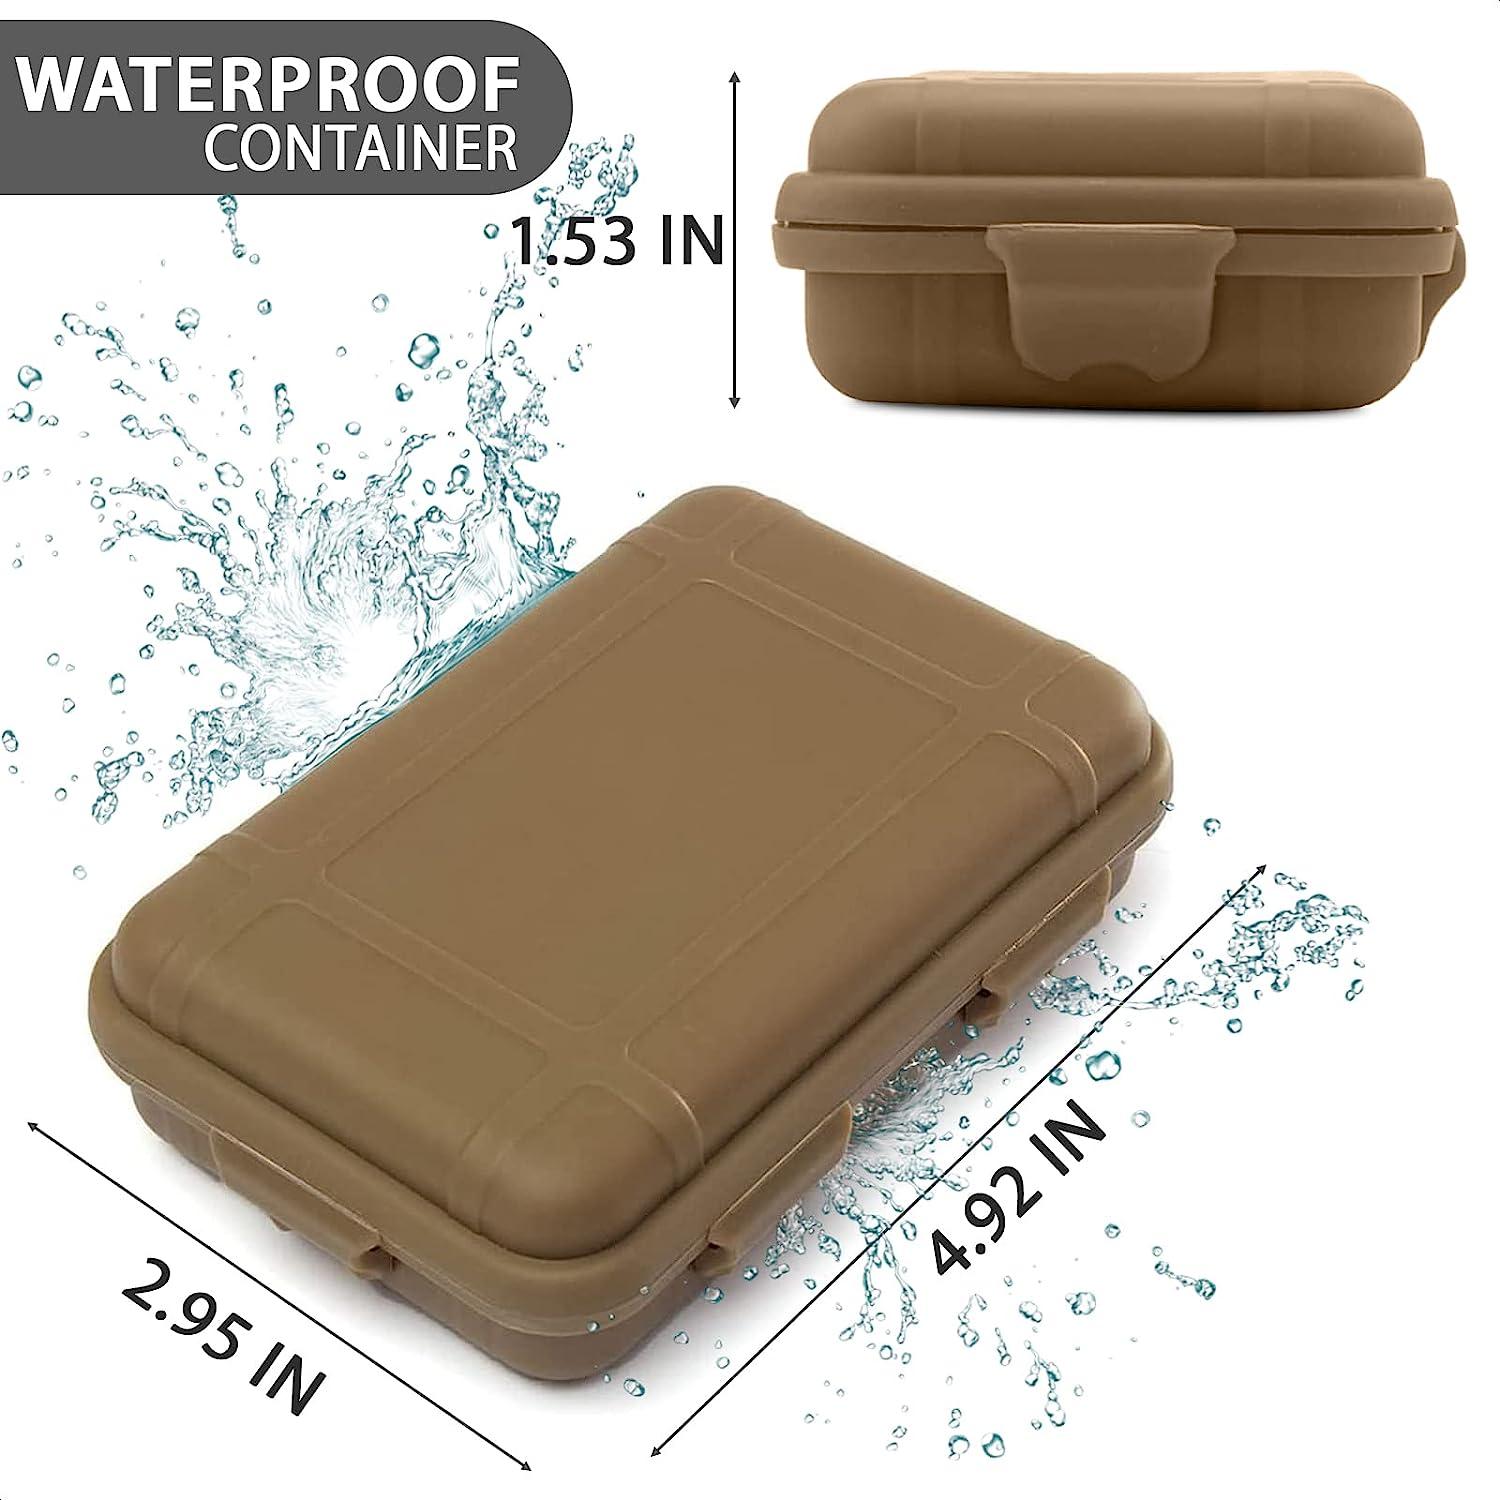 Small Waterproof Phone Container - Universal Plastic Box with